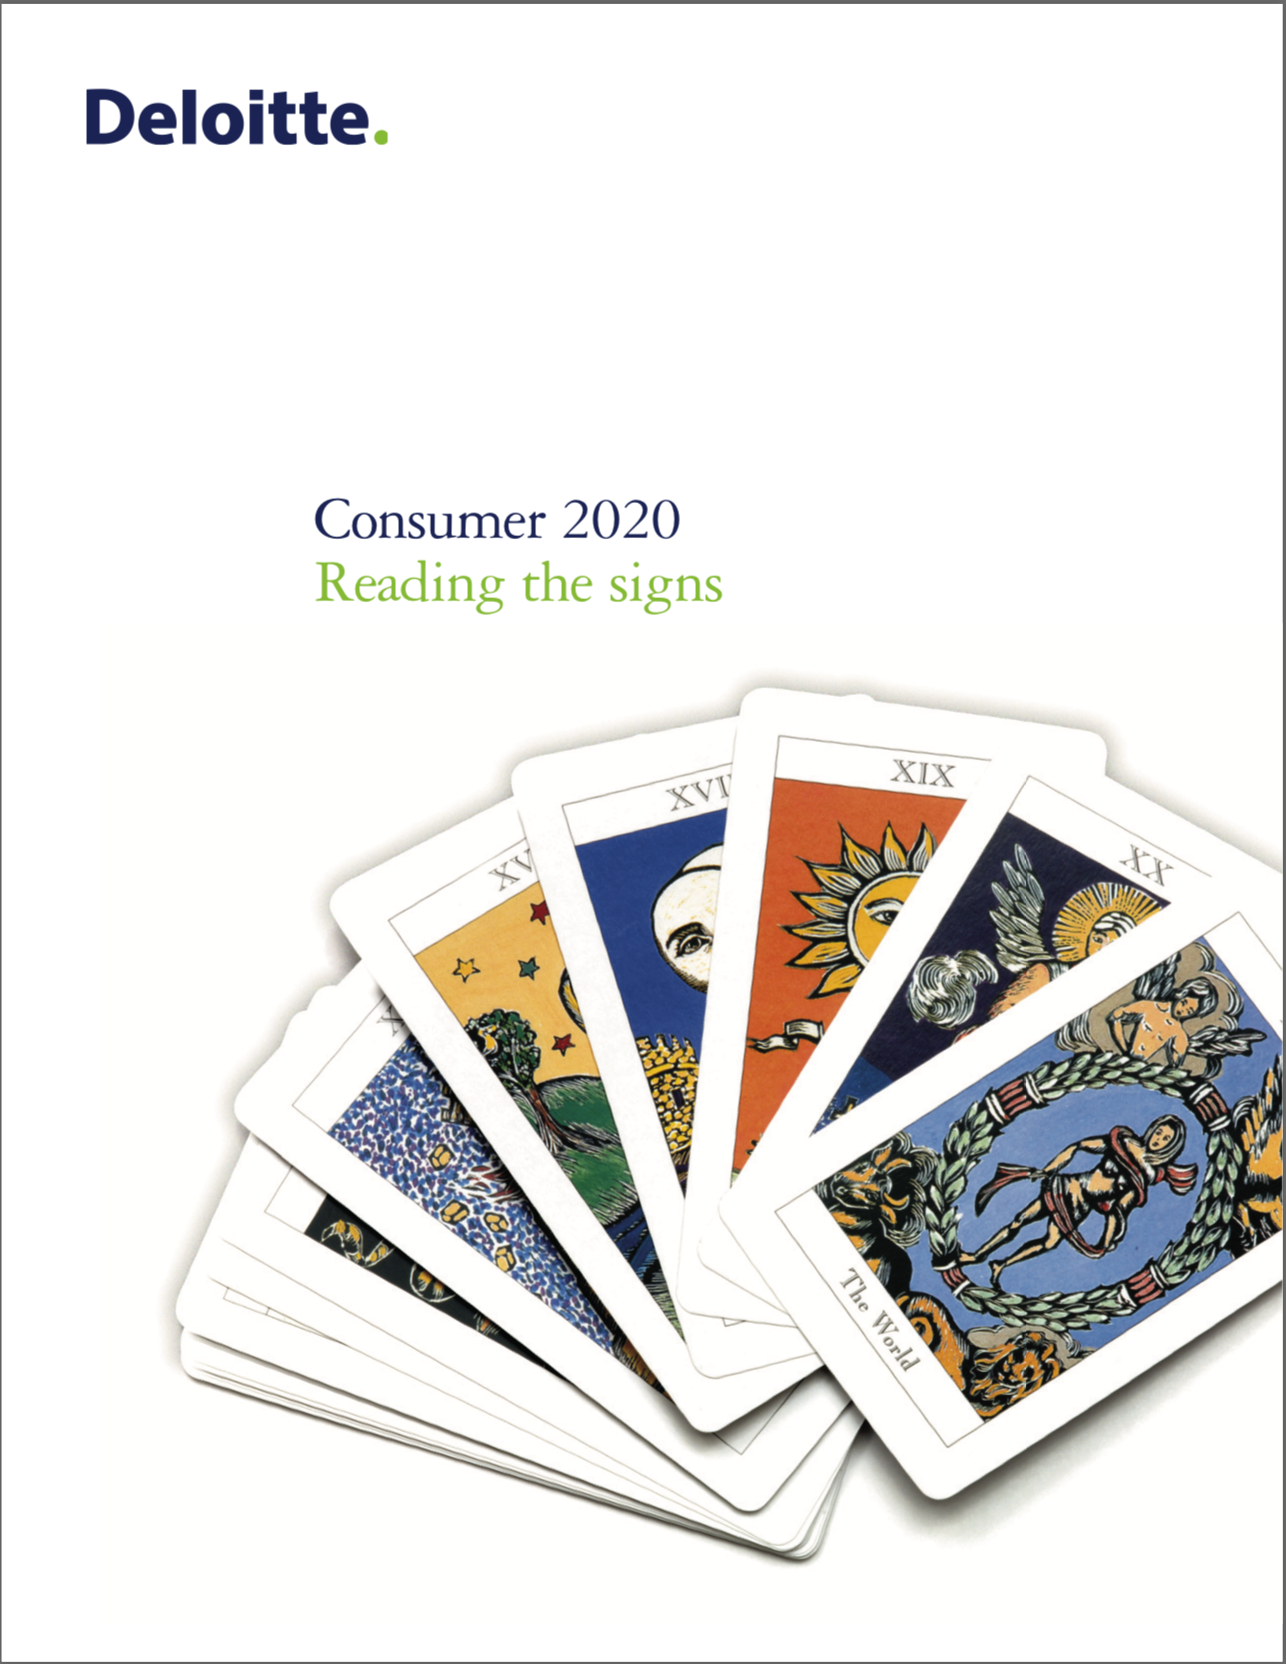 Consumer 2020 - Reading the signs